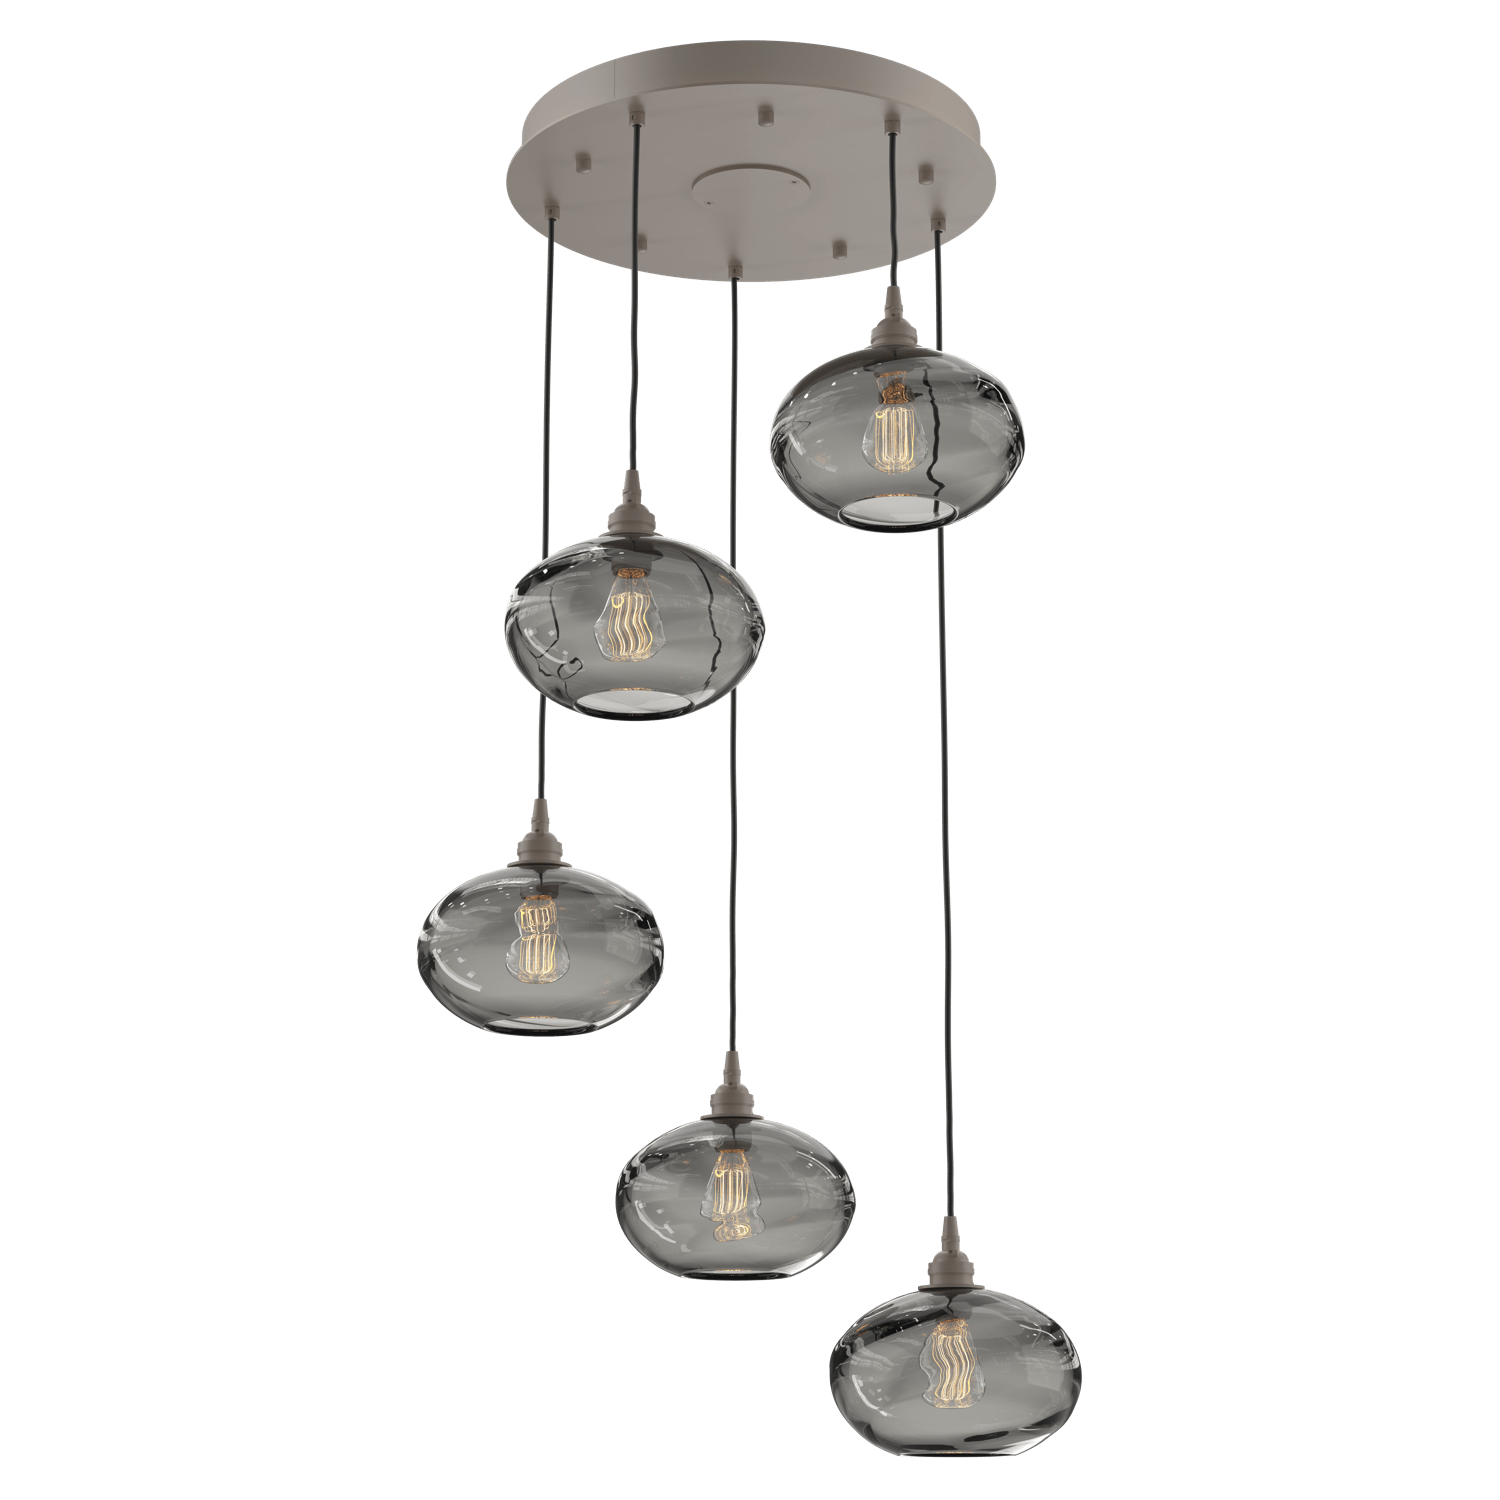 CHB0036-05-BS-OS-Hammerton-Studio-Optic-Blown-Glass-Coppa-5-light-round-pendant-chandelier-with-metallic-beige-silver-finish-and-optic-smoke-blown-glass-shades-and-incandescent-lamping